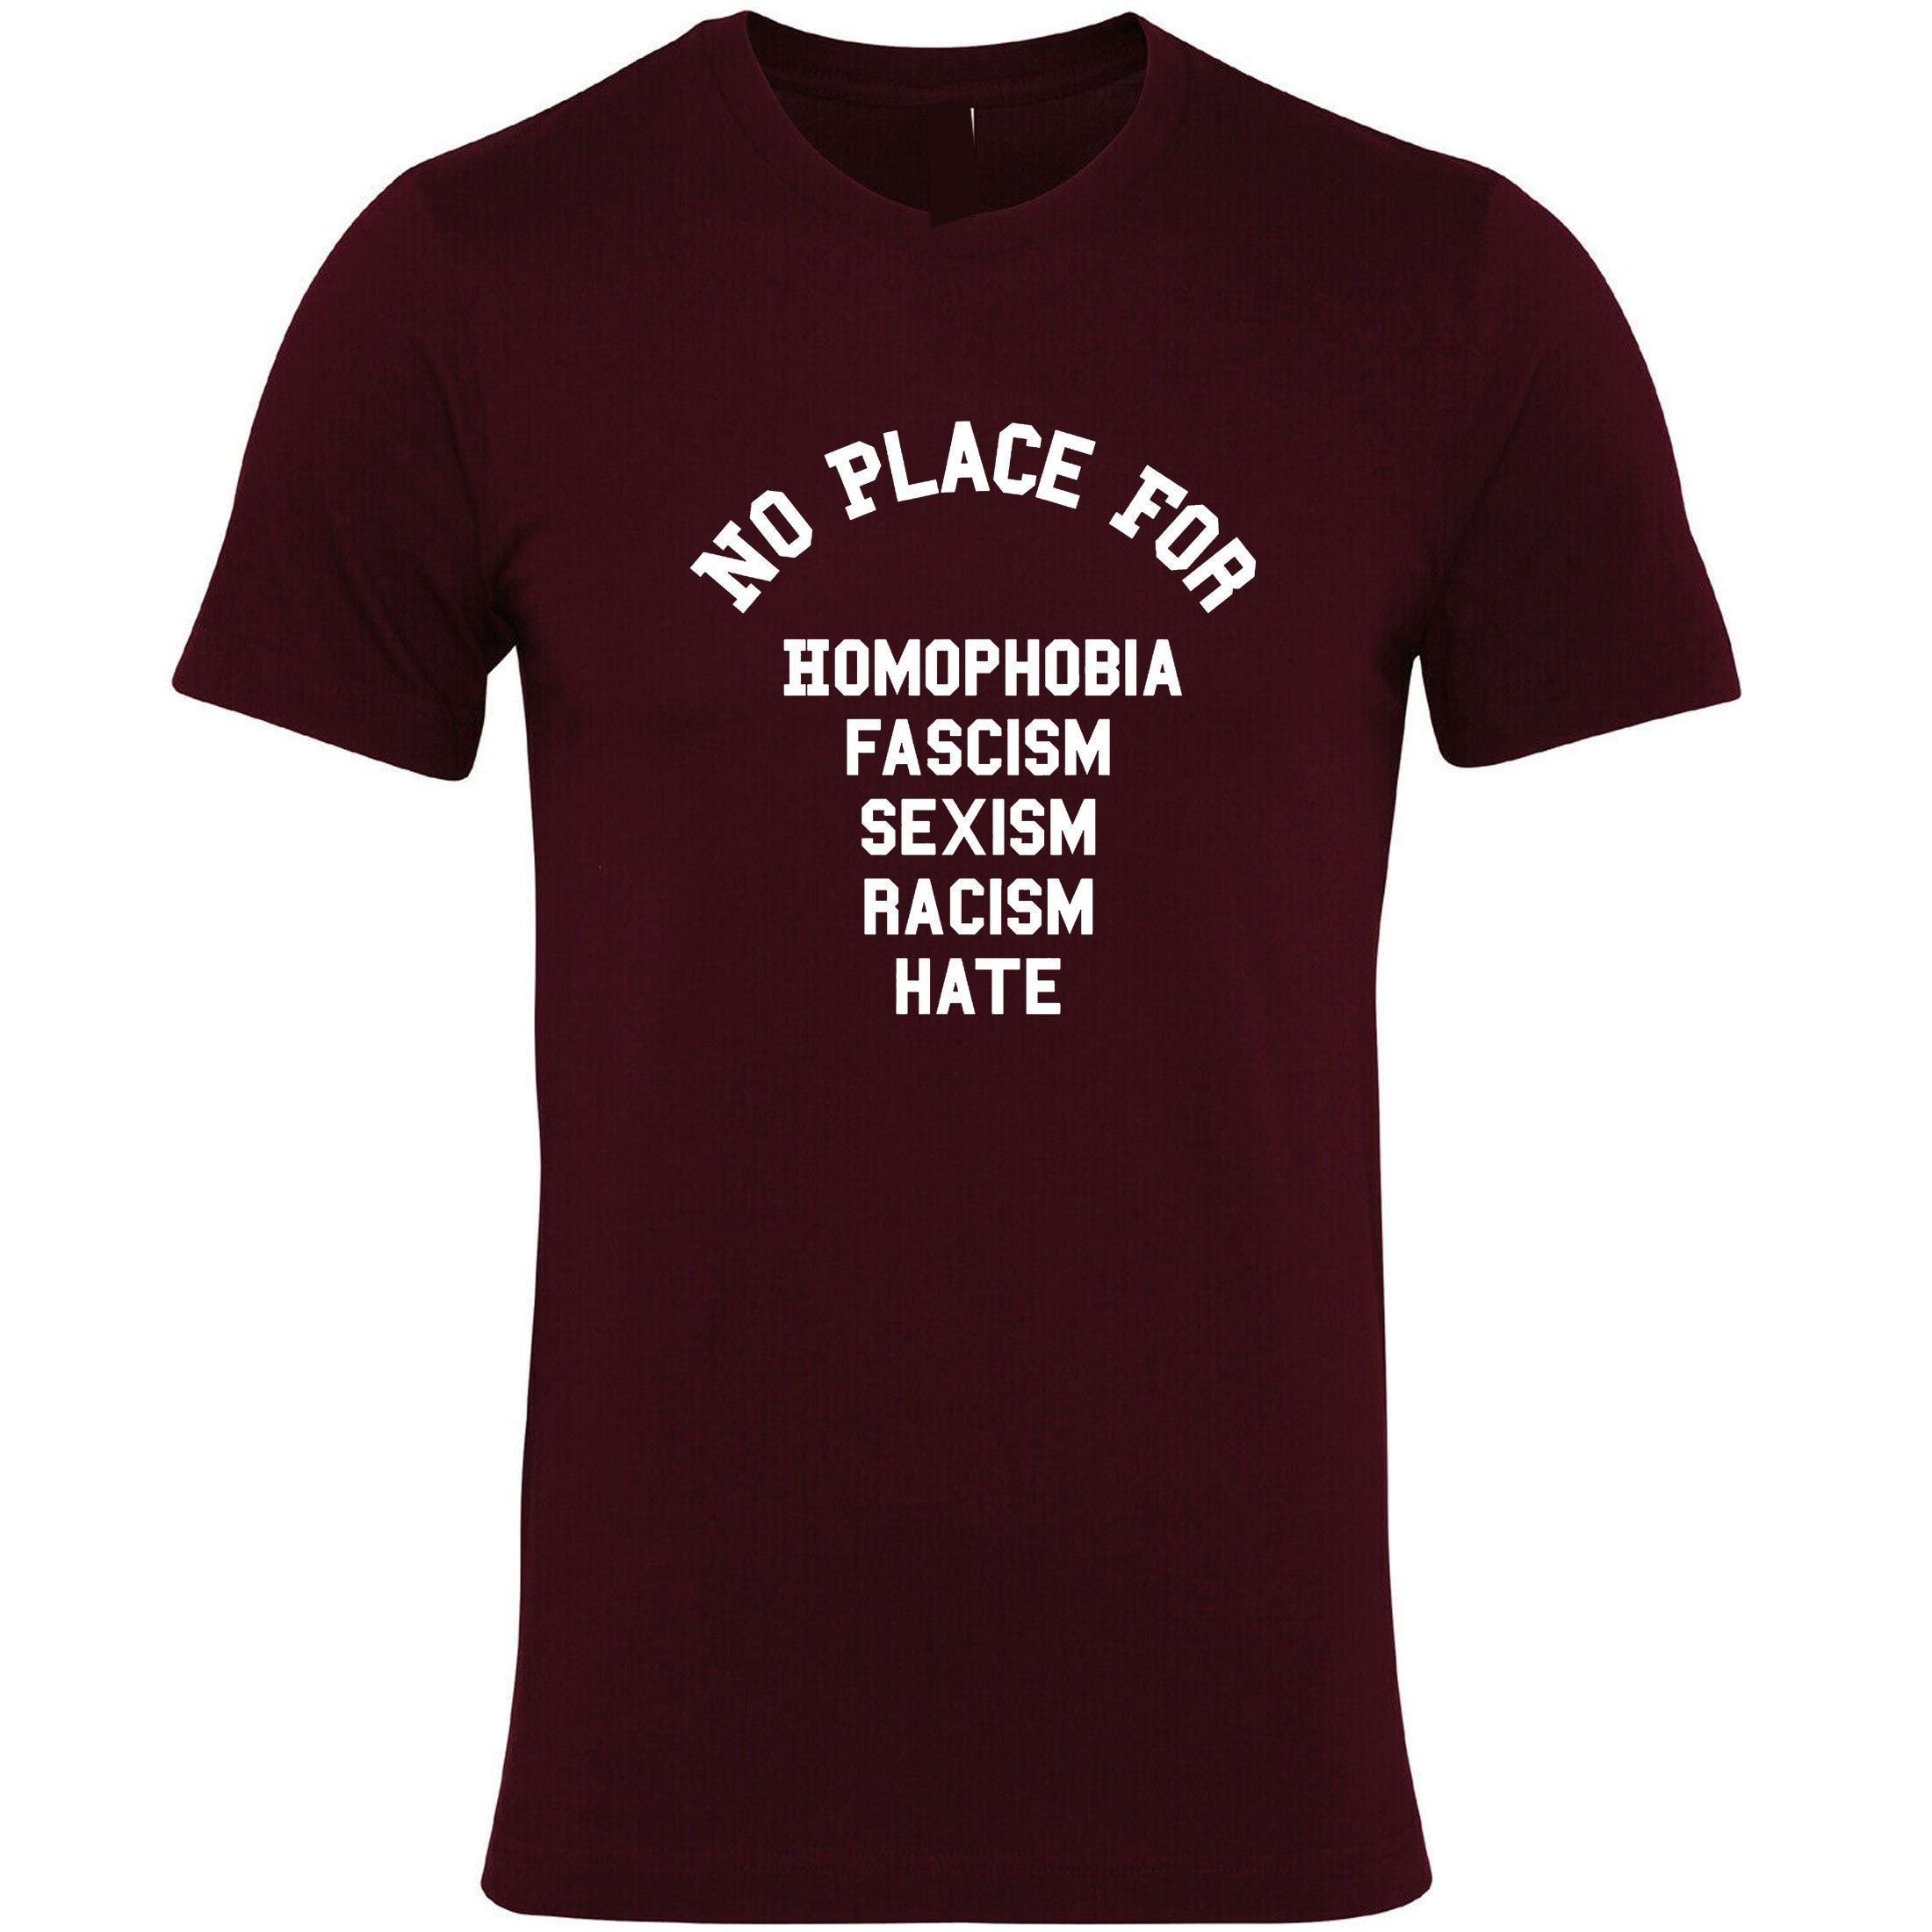 No Place for Racism Homophobia Sexism Fascism Hate T Shirt Tee - Etsy ...